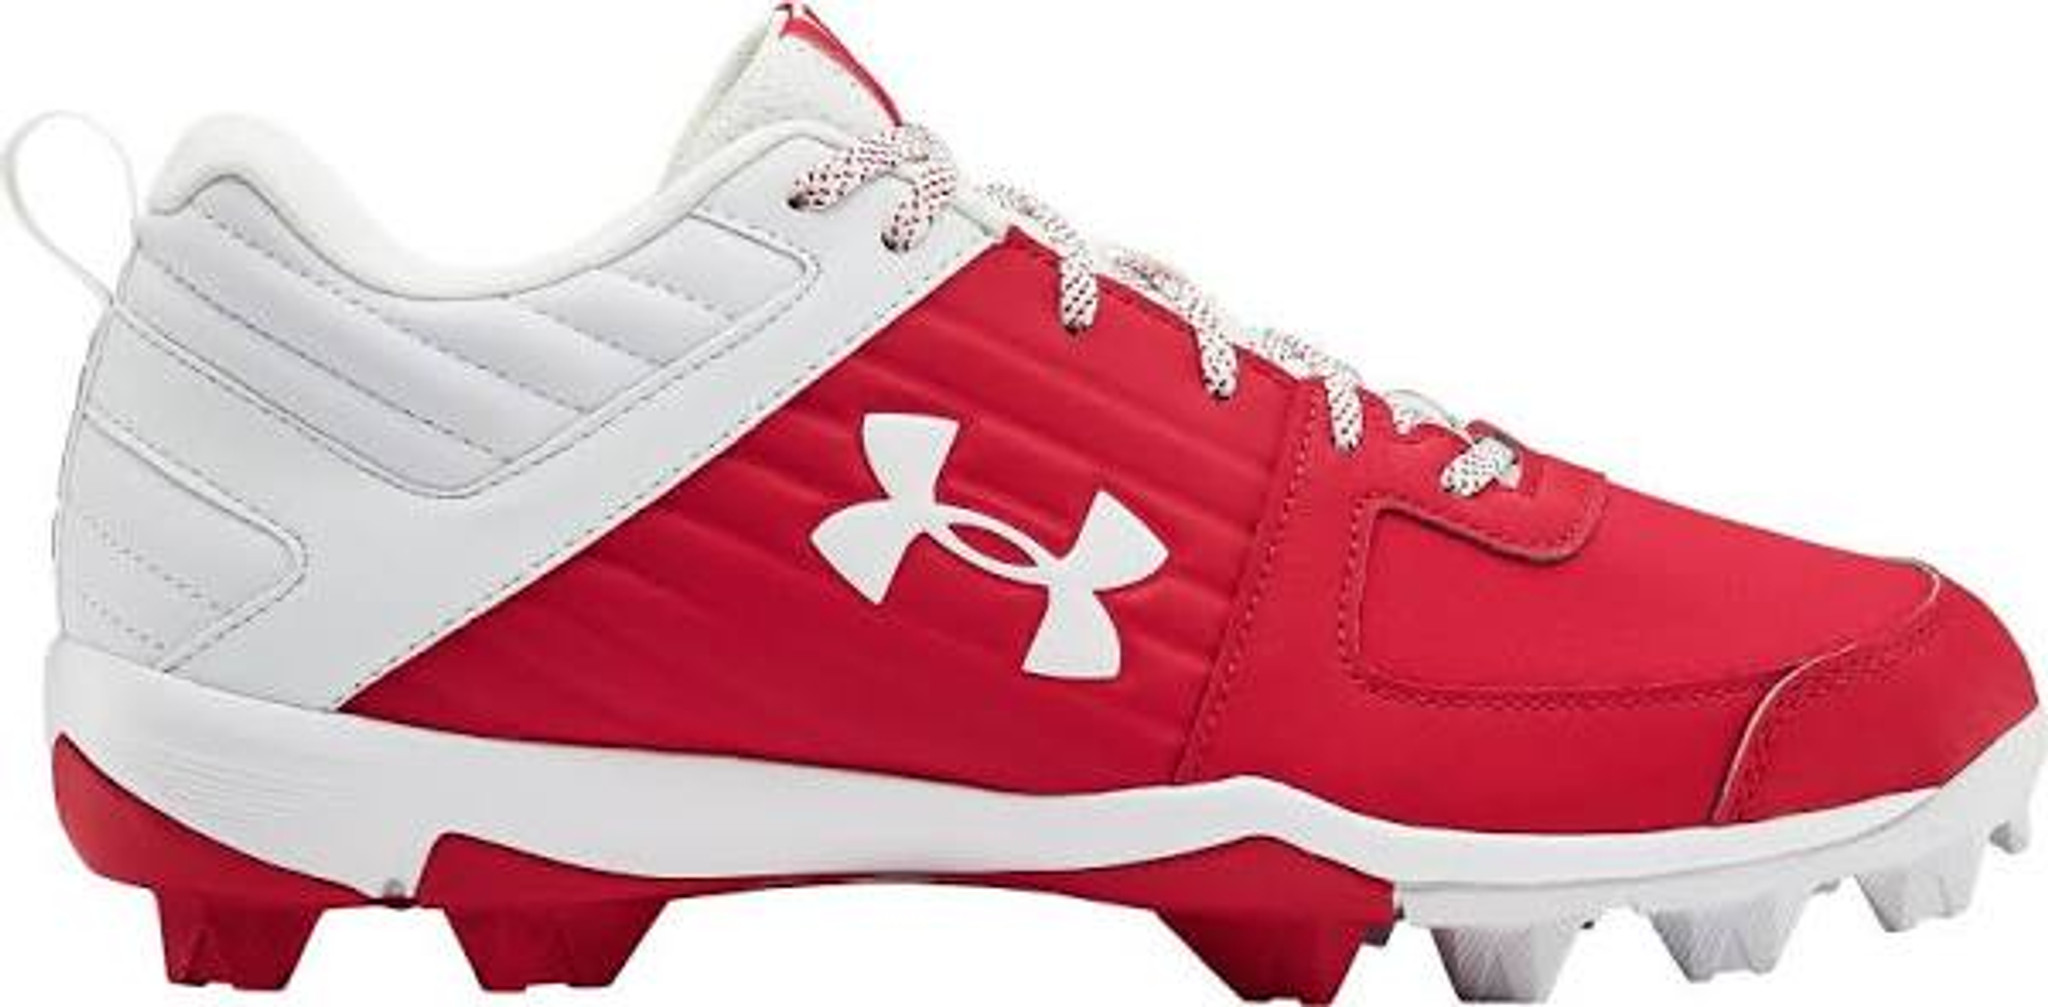 Under Armour Leadoff Low RM Adult Baseball Shoe 3022071-600